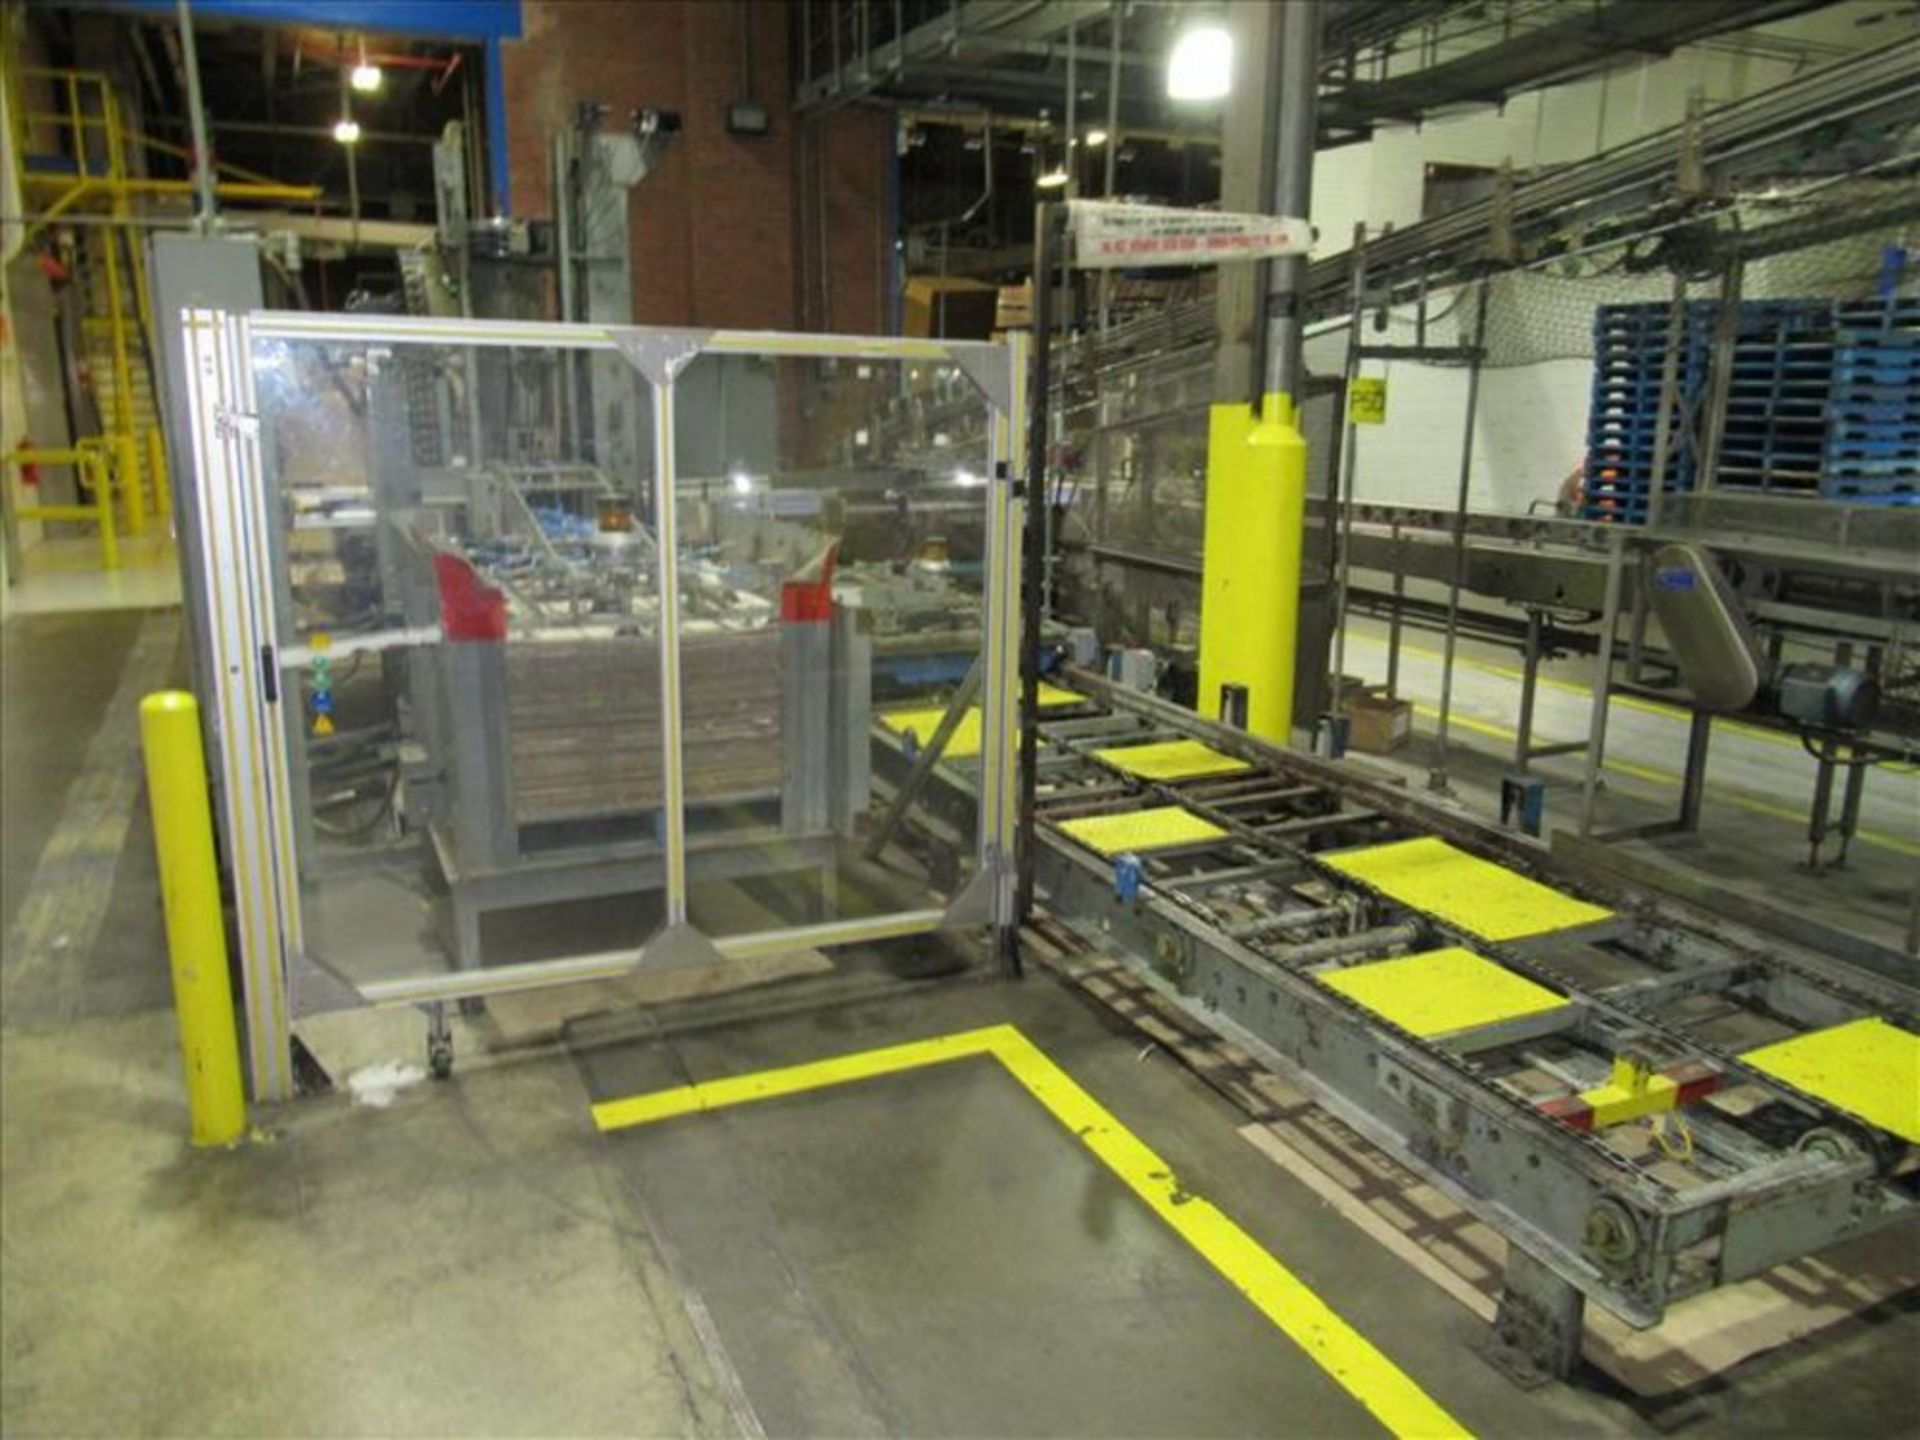 Whallon Brite depalletizer 90 deg swing type, dual head auto accumulation unit with approx 45 in.